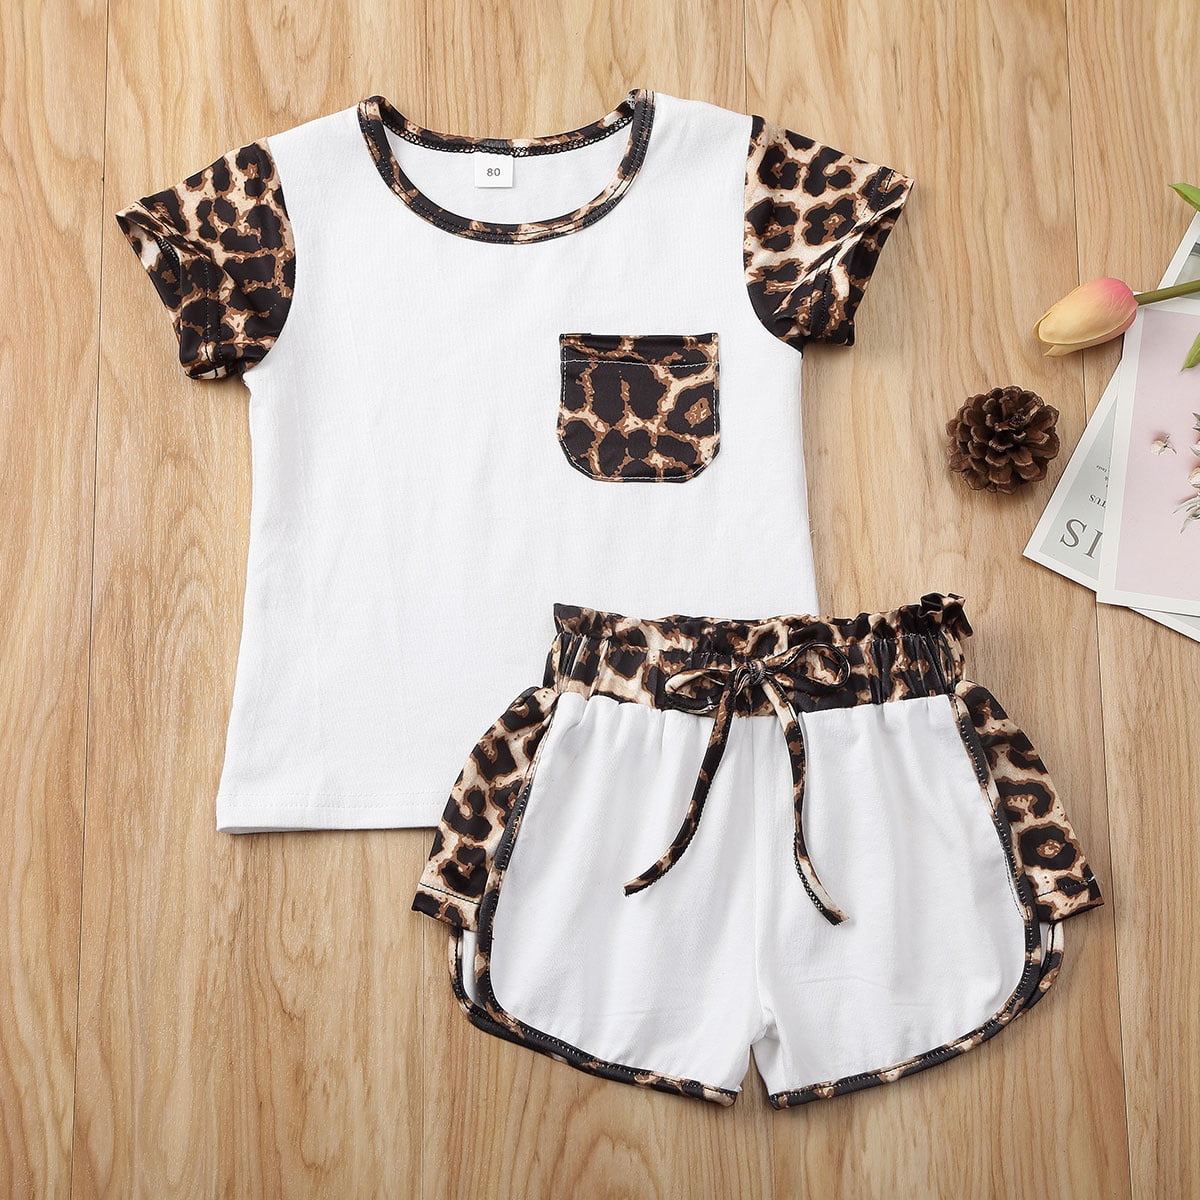 Toddler Girl Clothes Short Sleeve Tops Leopard Pants Baby Boy Outfits Set